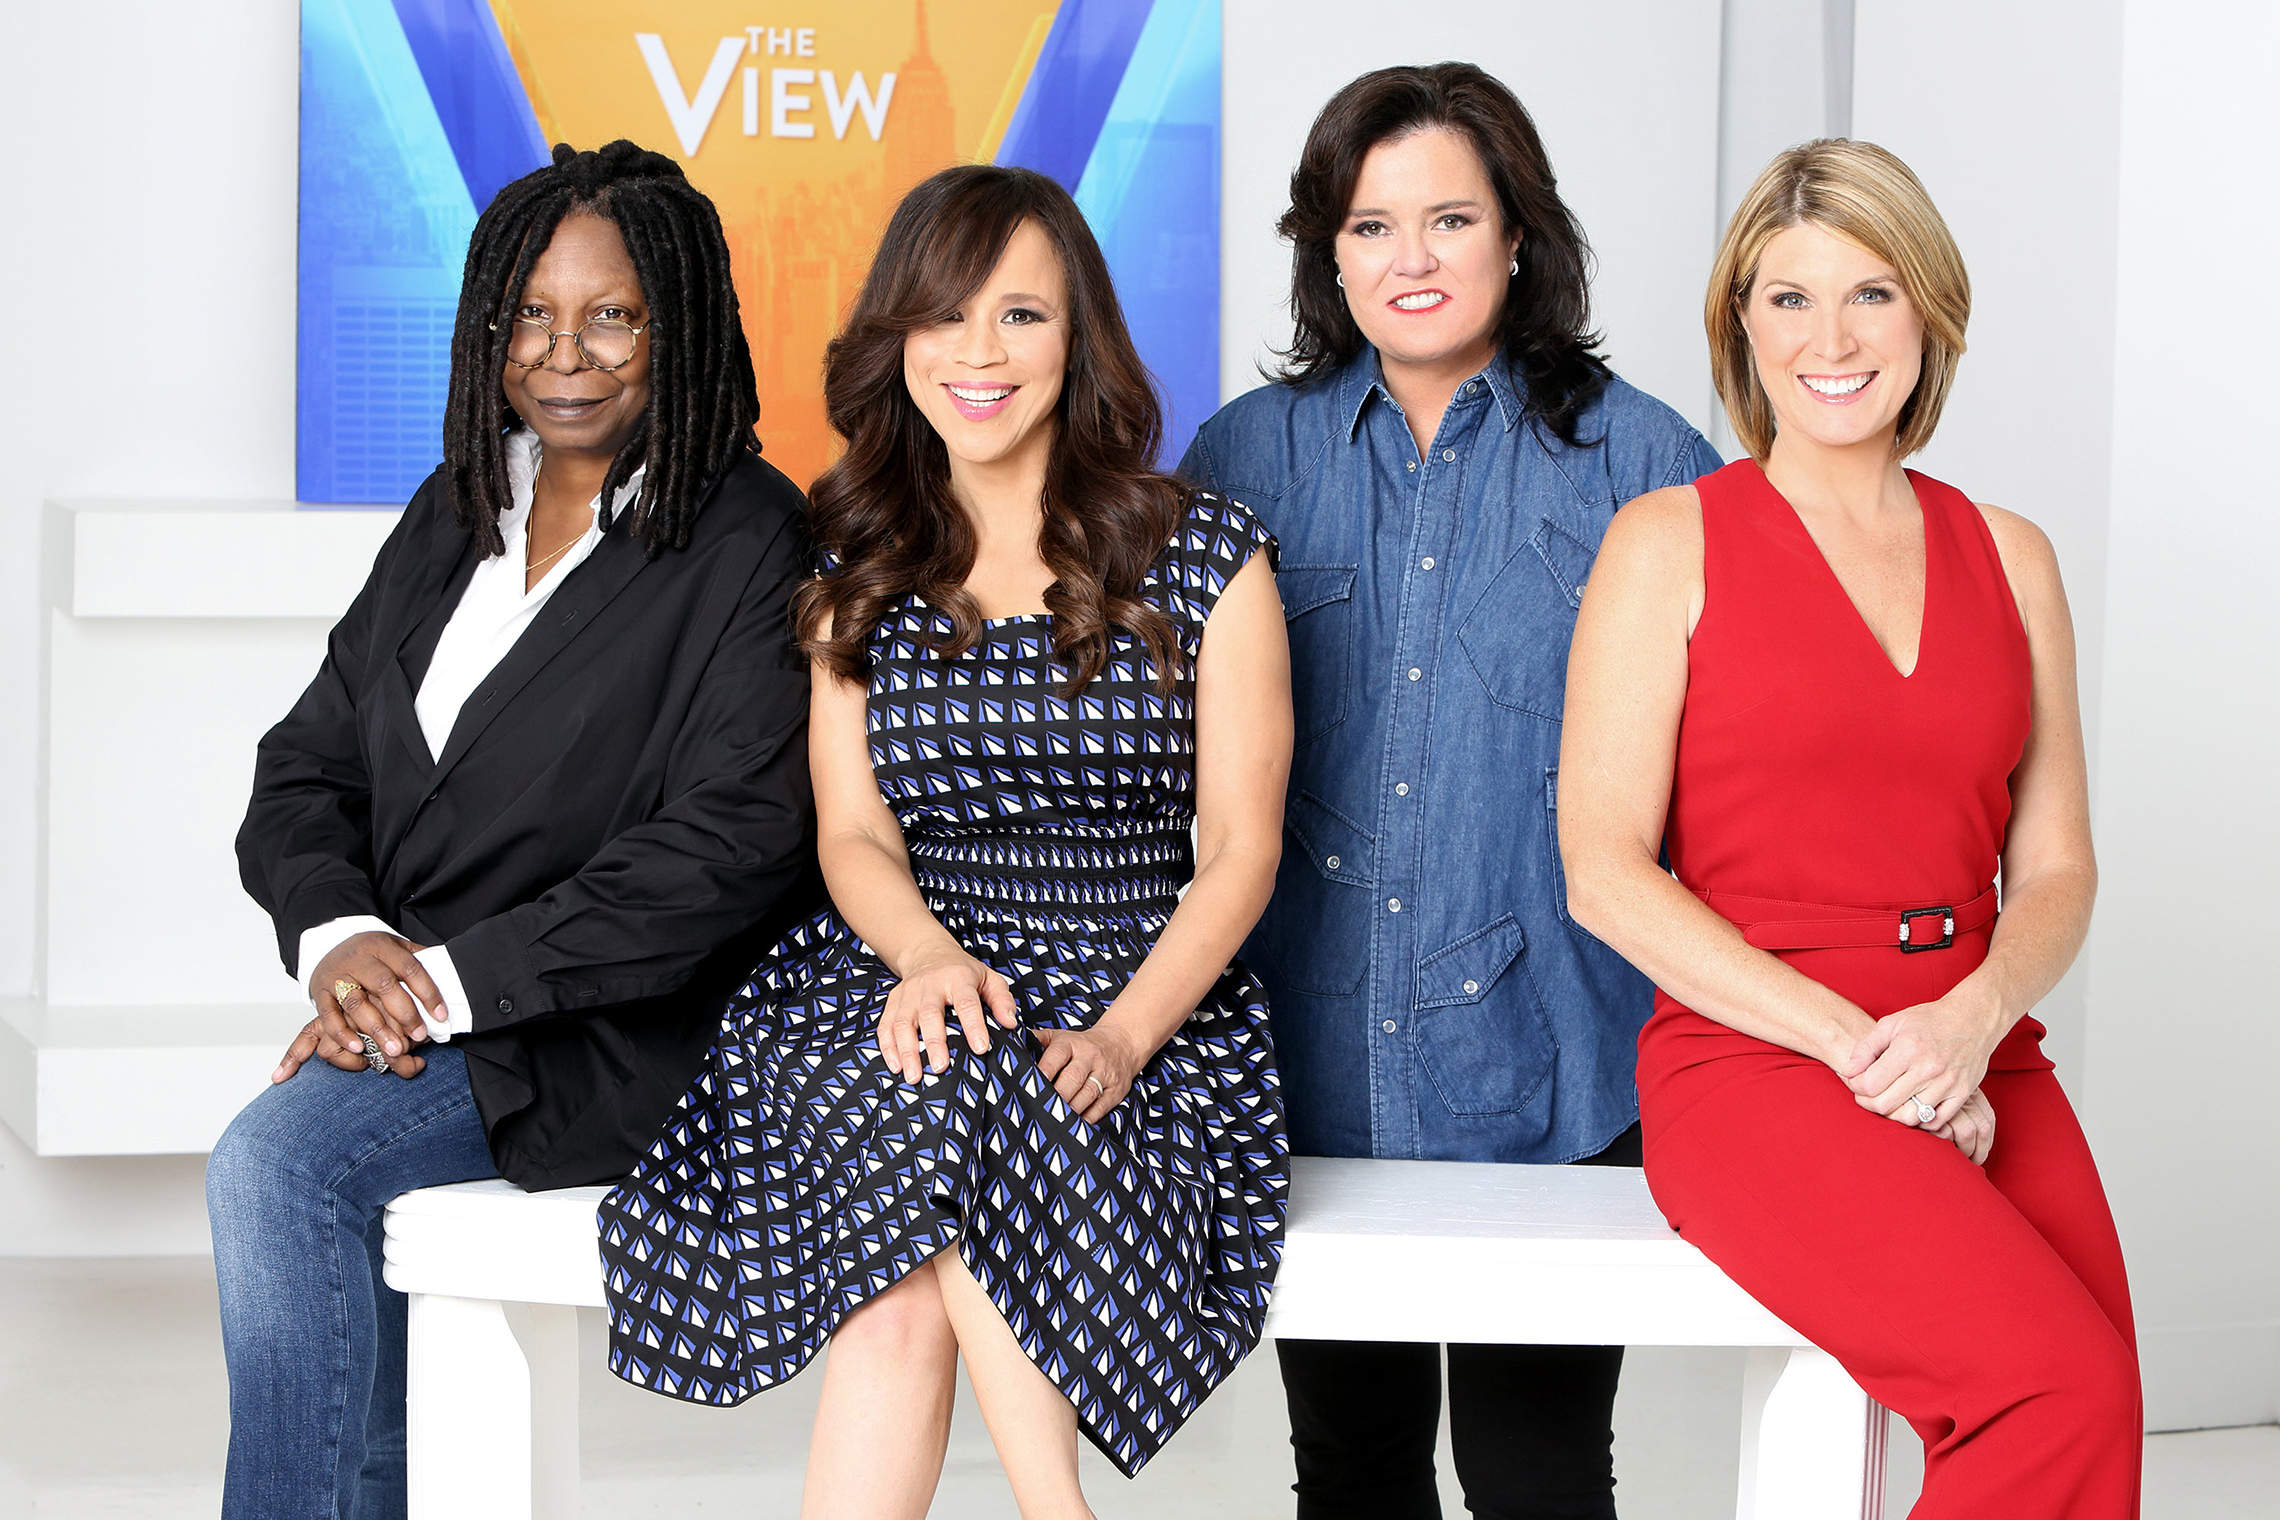 2014: Whoopi Goldberg, Rosie Perez, Rosie O'Donnell, and Nicolle Wallace on ABC's daytime television talk show "The View." Since 2007, she has been the moderator of the show.